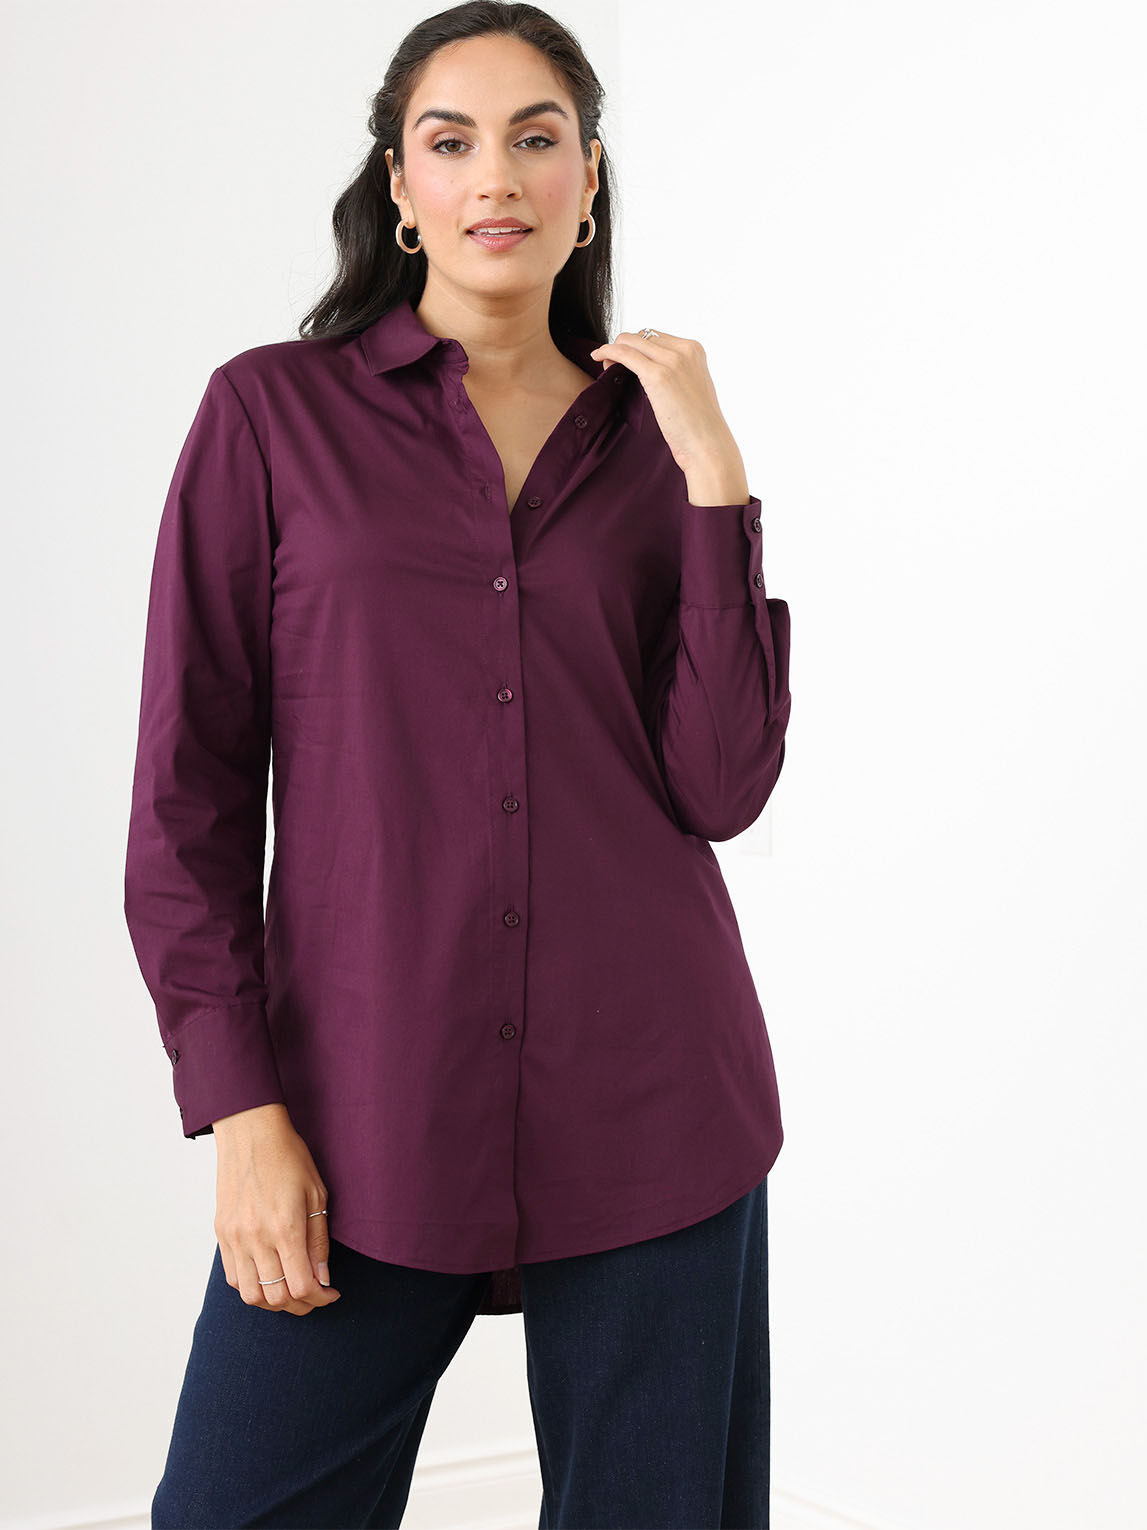 Long Sleeve Relaxed Fit Collared Shirt